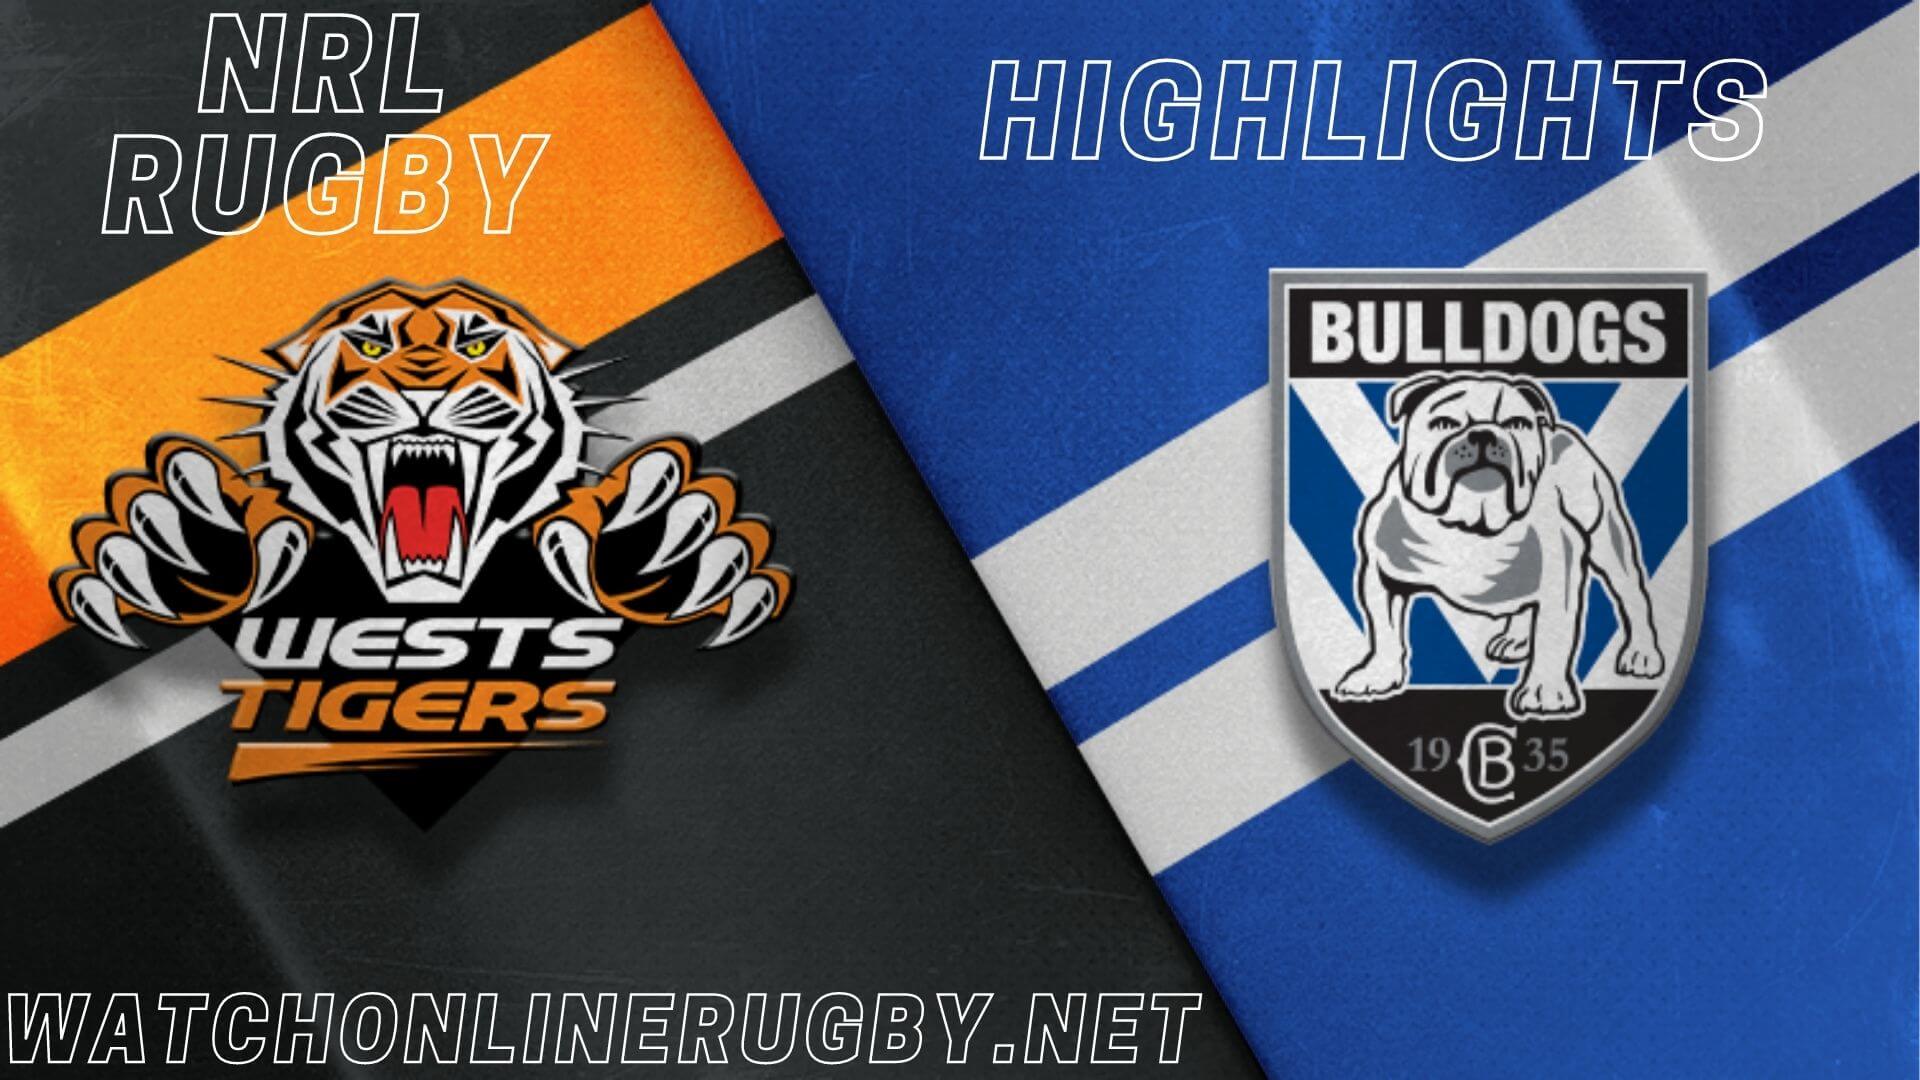 Wests Tigers Vs Bulldogs Highlights RD 11 NRL Rugby